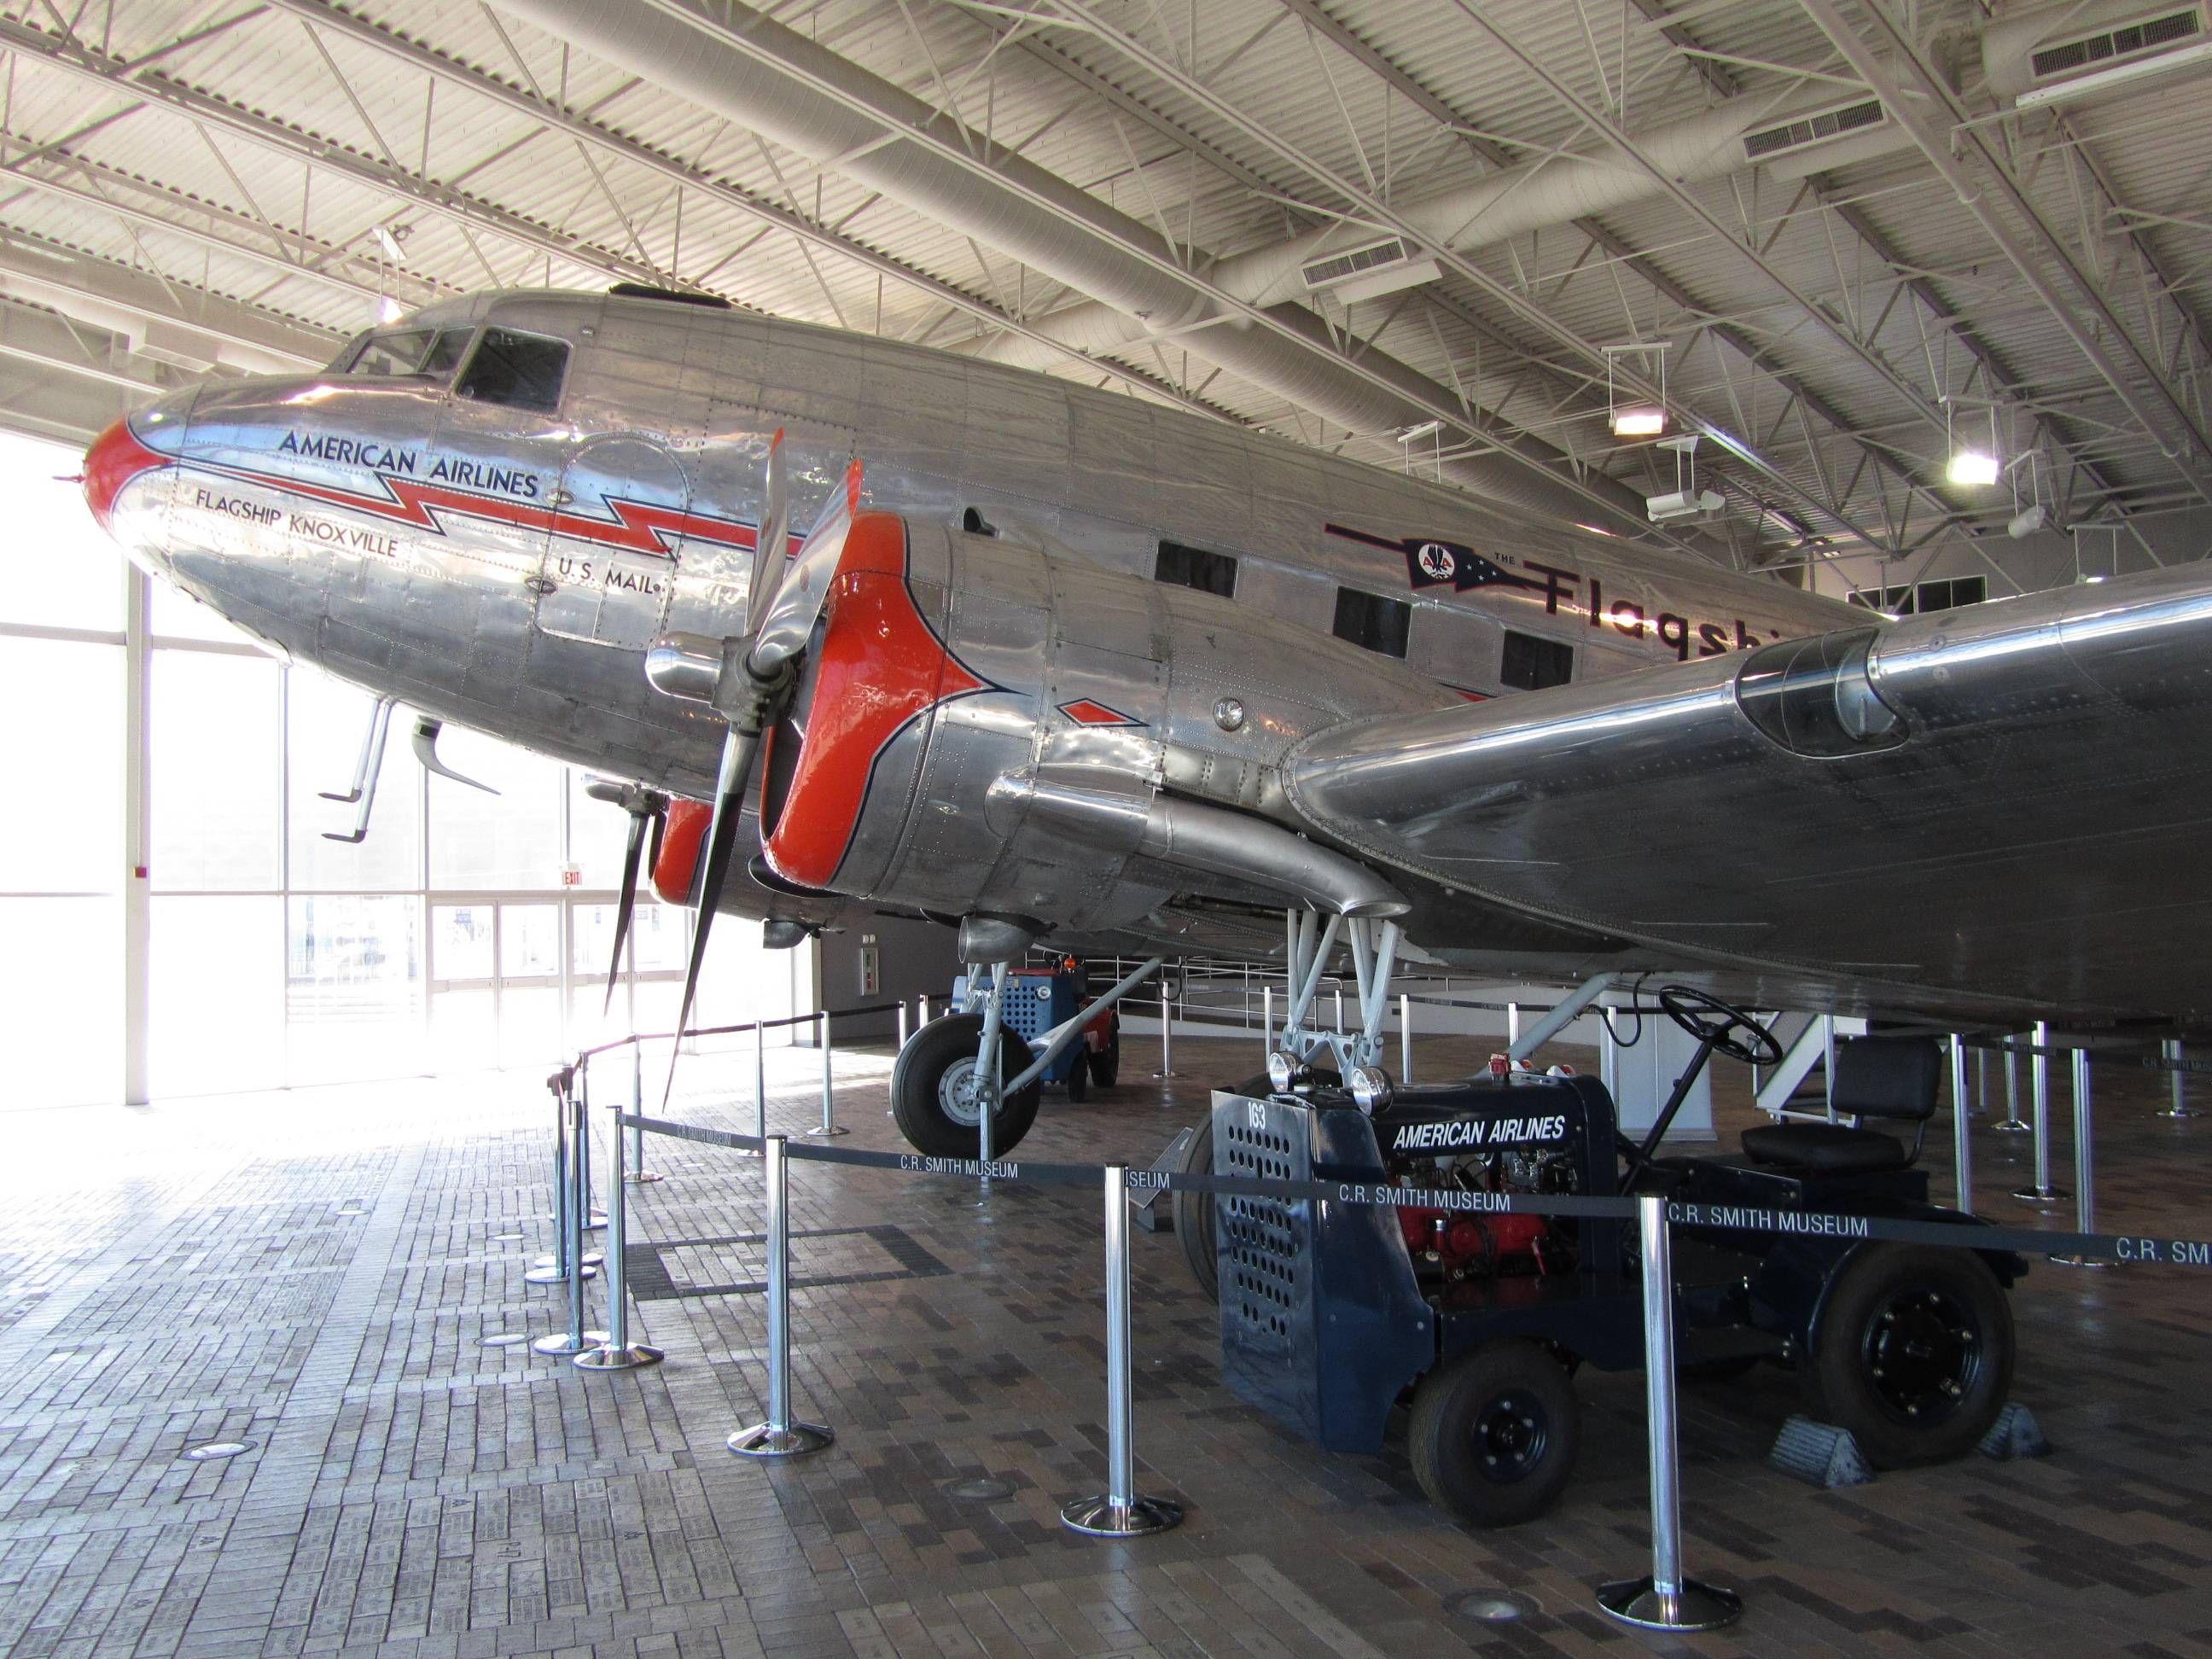 American Airlines CR Smith Museum